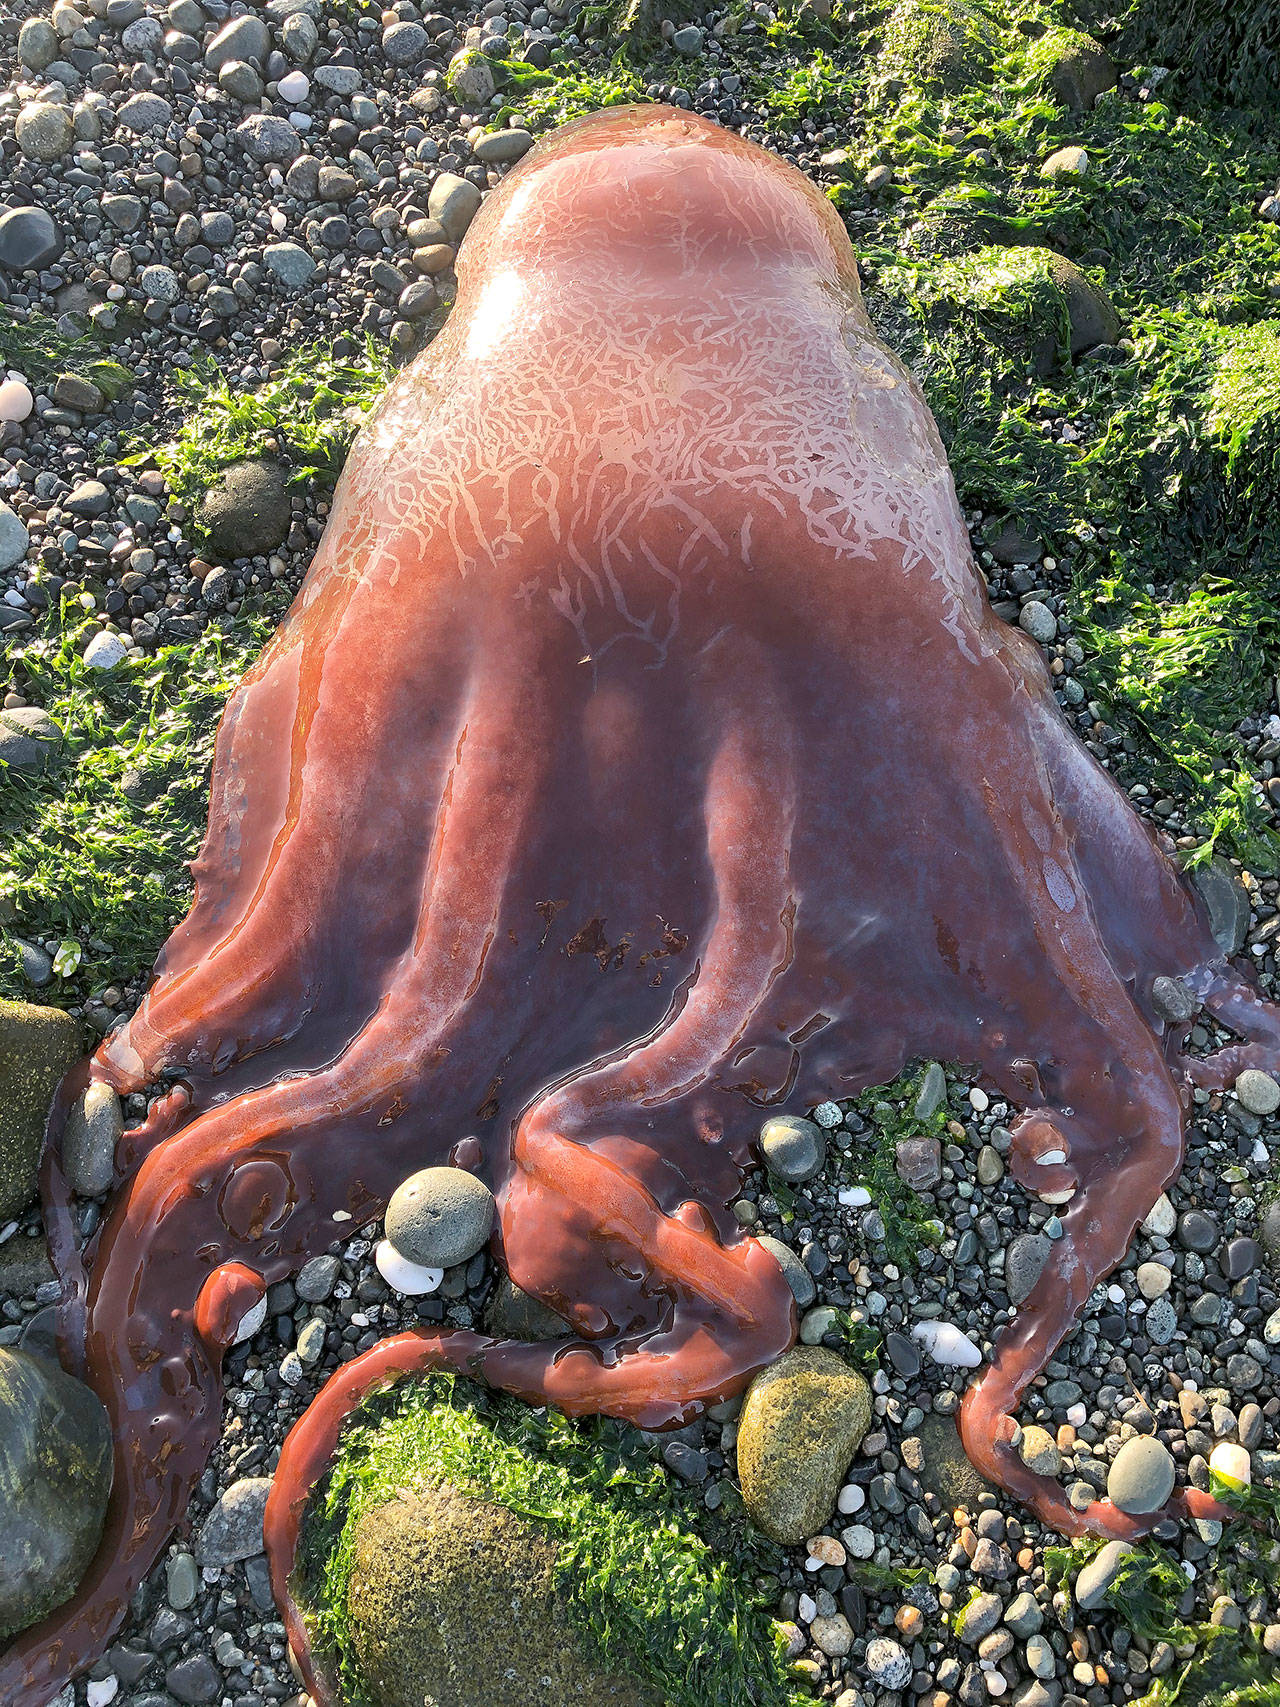 Scientists from across the United States have been sucked in to the challenge to identify this kraken-like creature found at Ebey’s Landing. The consensus is that it is a seven-armed octopus. Photo by Ron Newberry.